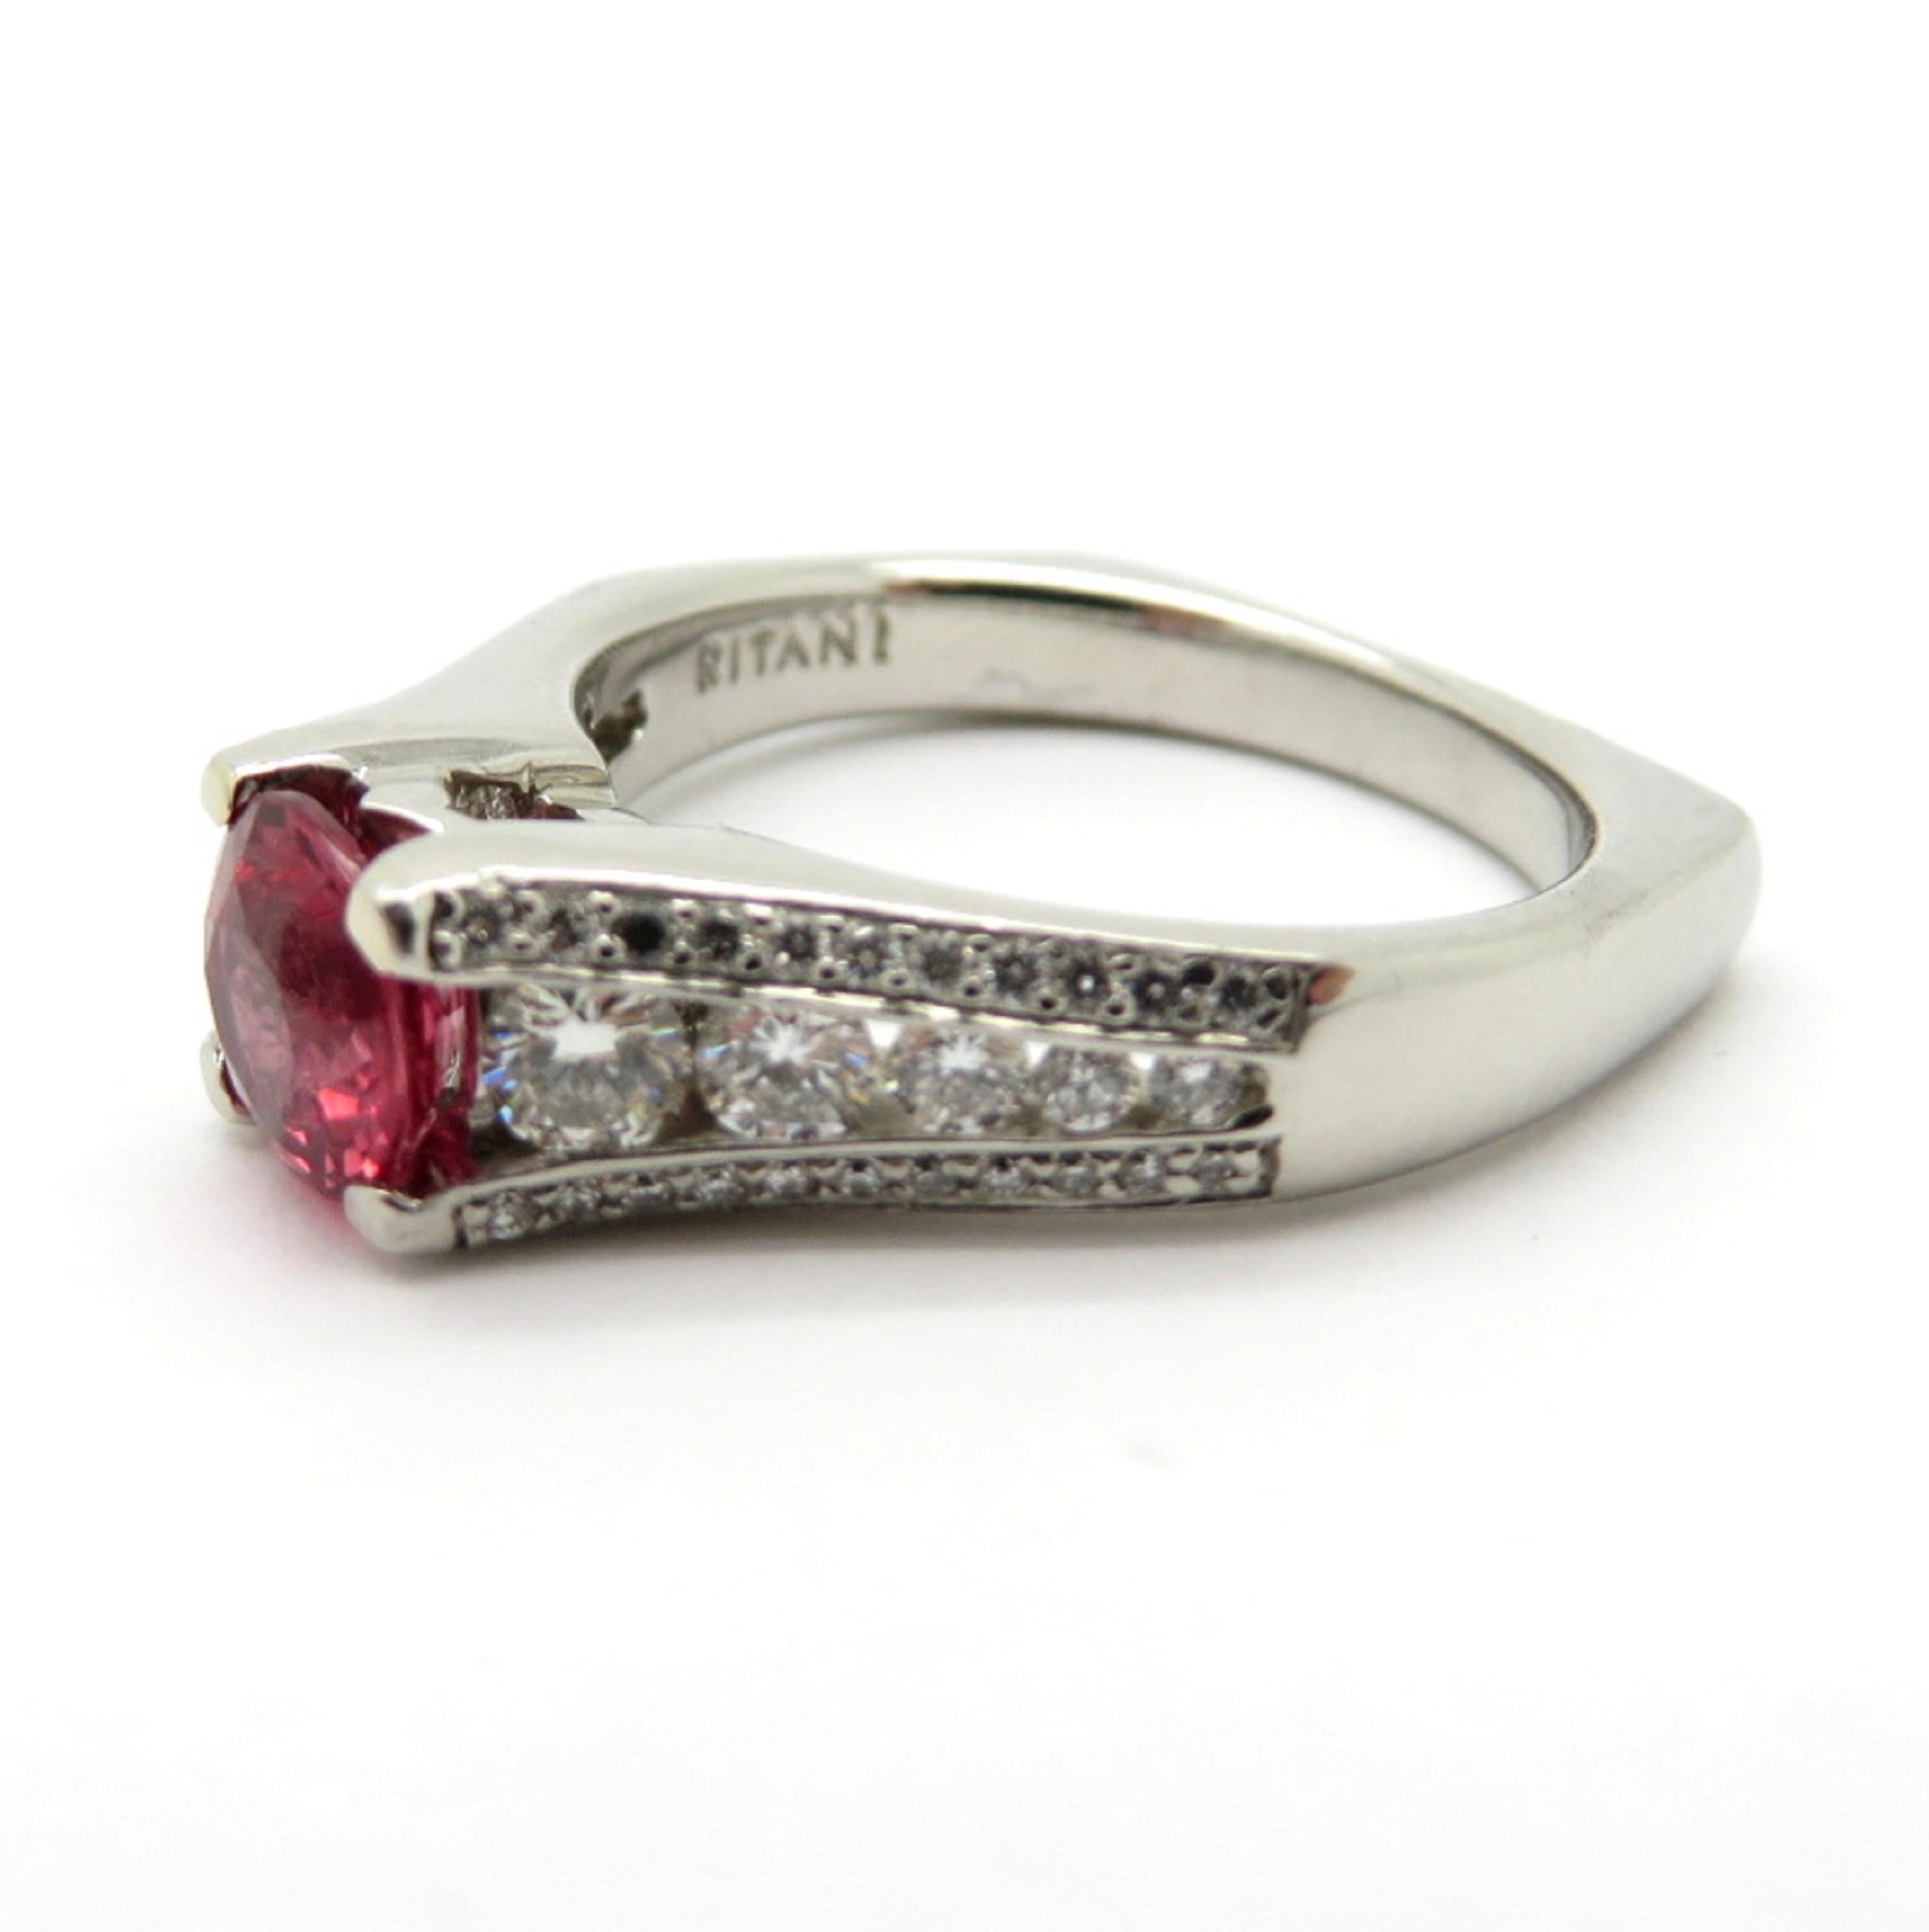 For sale is a Desiger Ritani Round Diamond and Round Spinel Platinum Ring!
Showcasing 1 Round Brilliant Cut Pinkish Orange Spinel, weighing 1.05 carats, measuring 6.09-6.13 x 3.71 mm.
Accenting the gemstone are 54 Round Brilliant Cut diamonds, bead